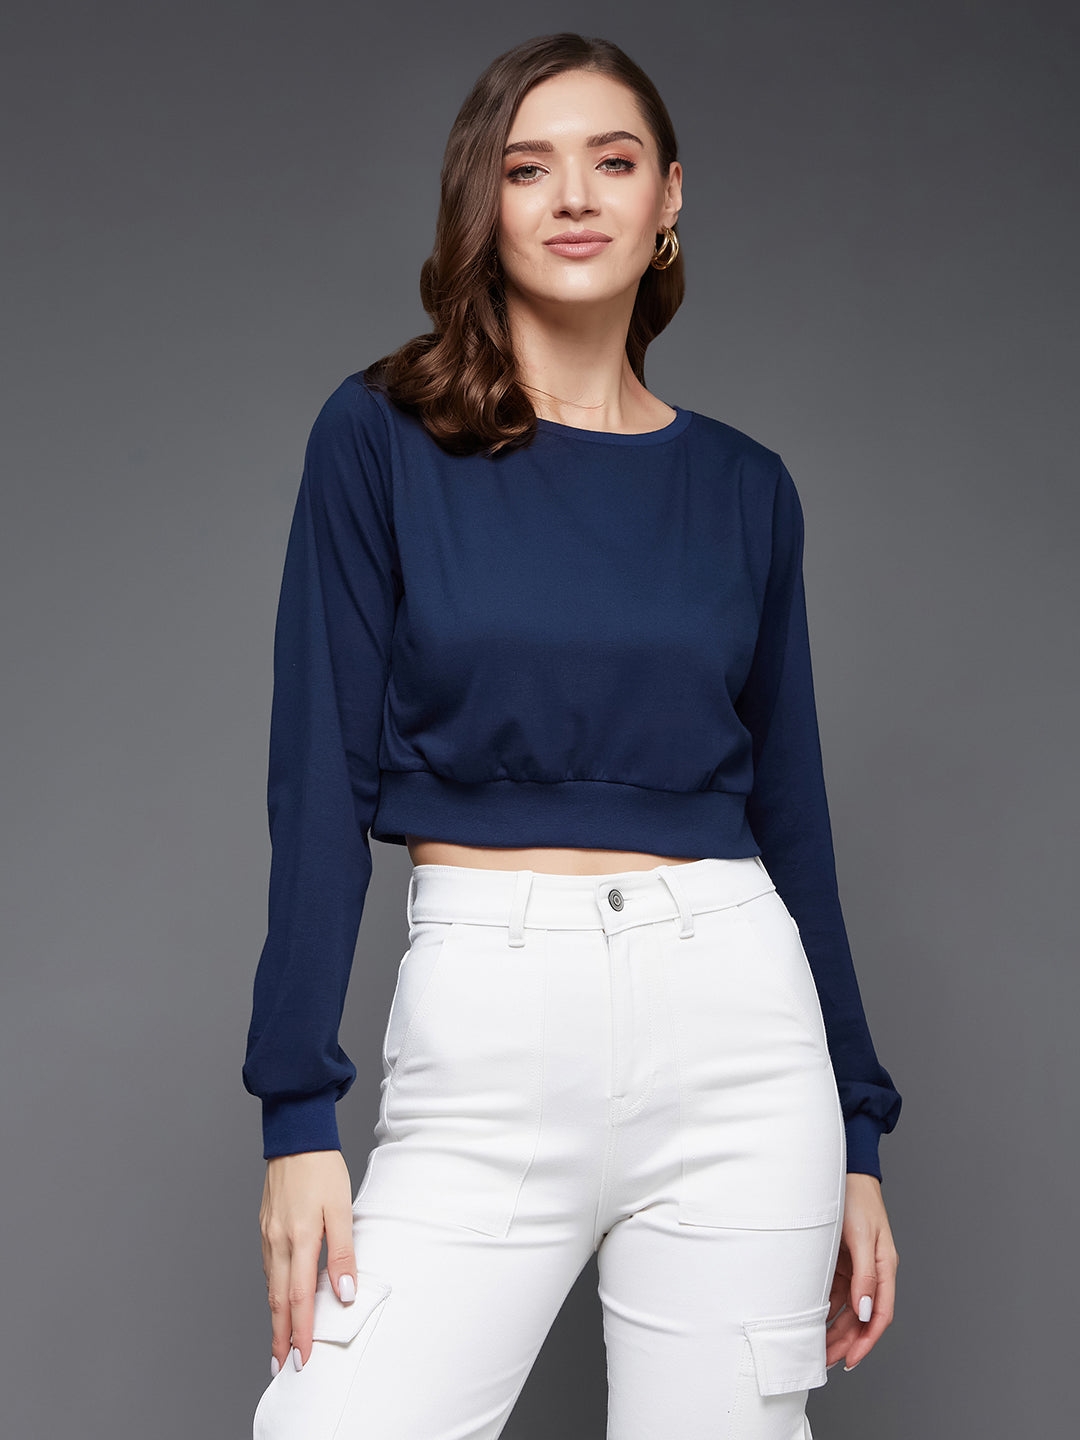 MISS CHASE | Navy Blue Round Neck Full Sleeves Solid Crop Top